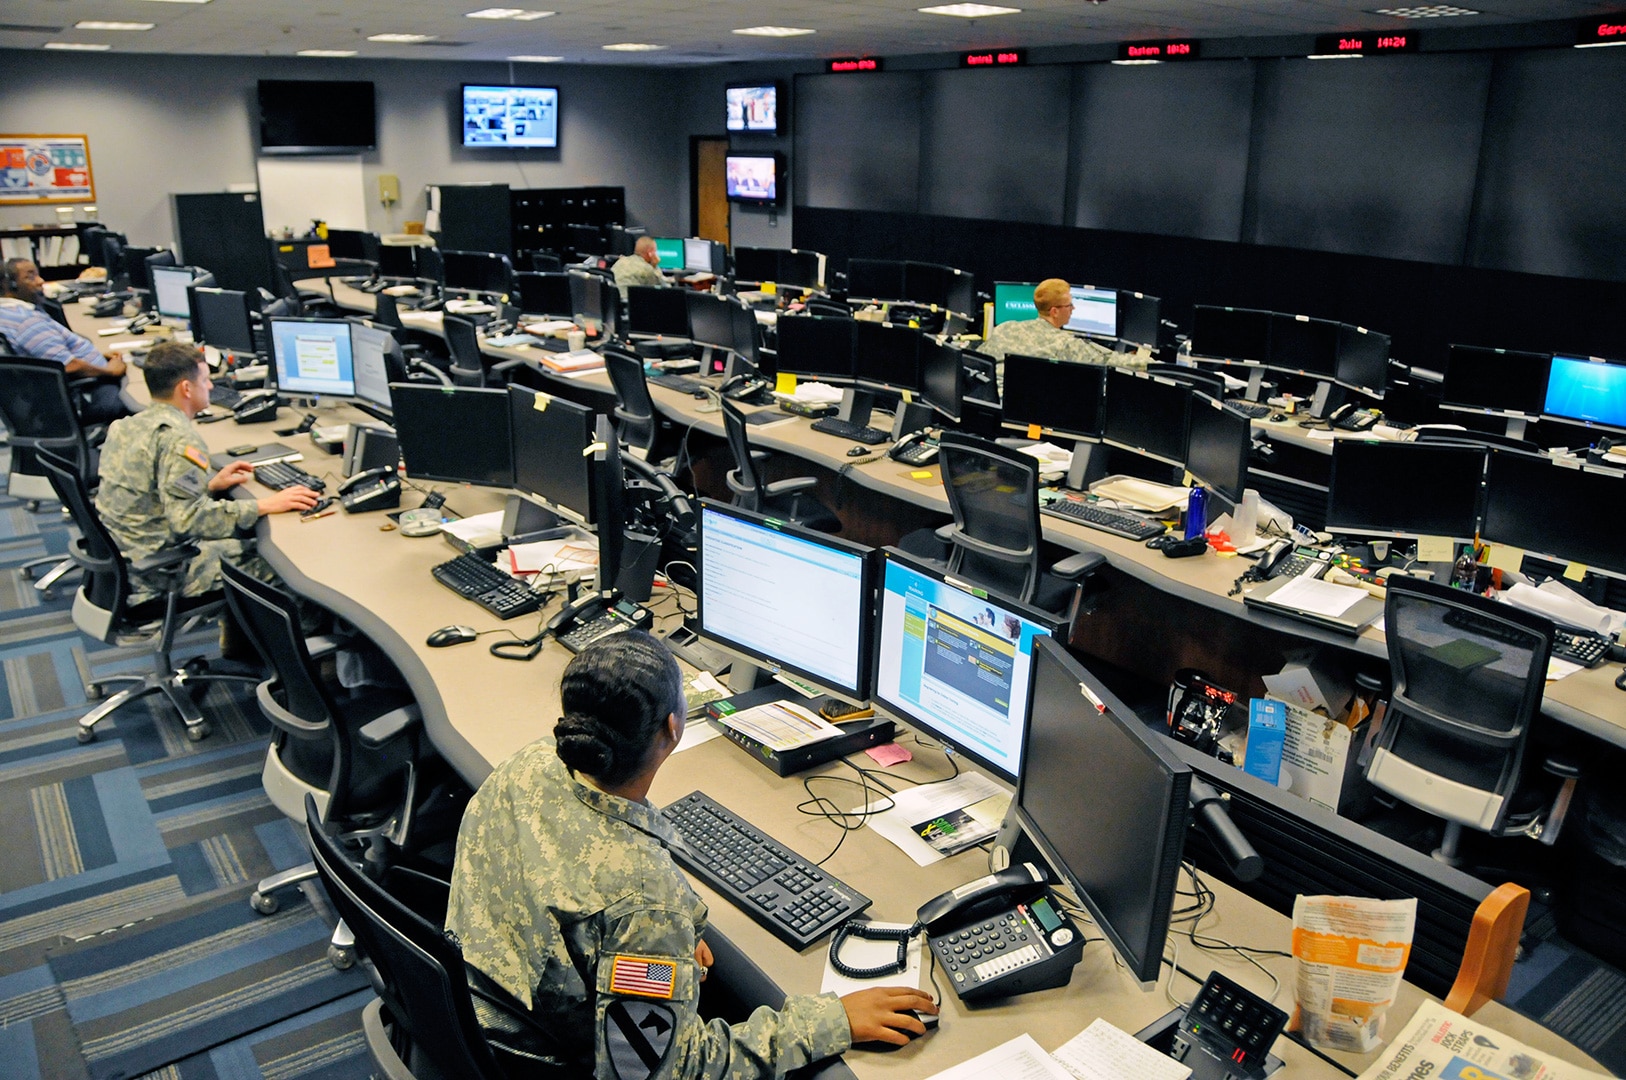 The Cyber Operations Center at Fort Gordon, Ga., is home to signal and military intelligence noncommissioned officers, who watch for and respond to network attacks from adversaries as varied as nation-states, terrorists and "hacktivists." The center was sanitized of classified information for this photo. (Photo Credit: U.S. Army photo by Michael L. Lewis)